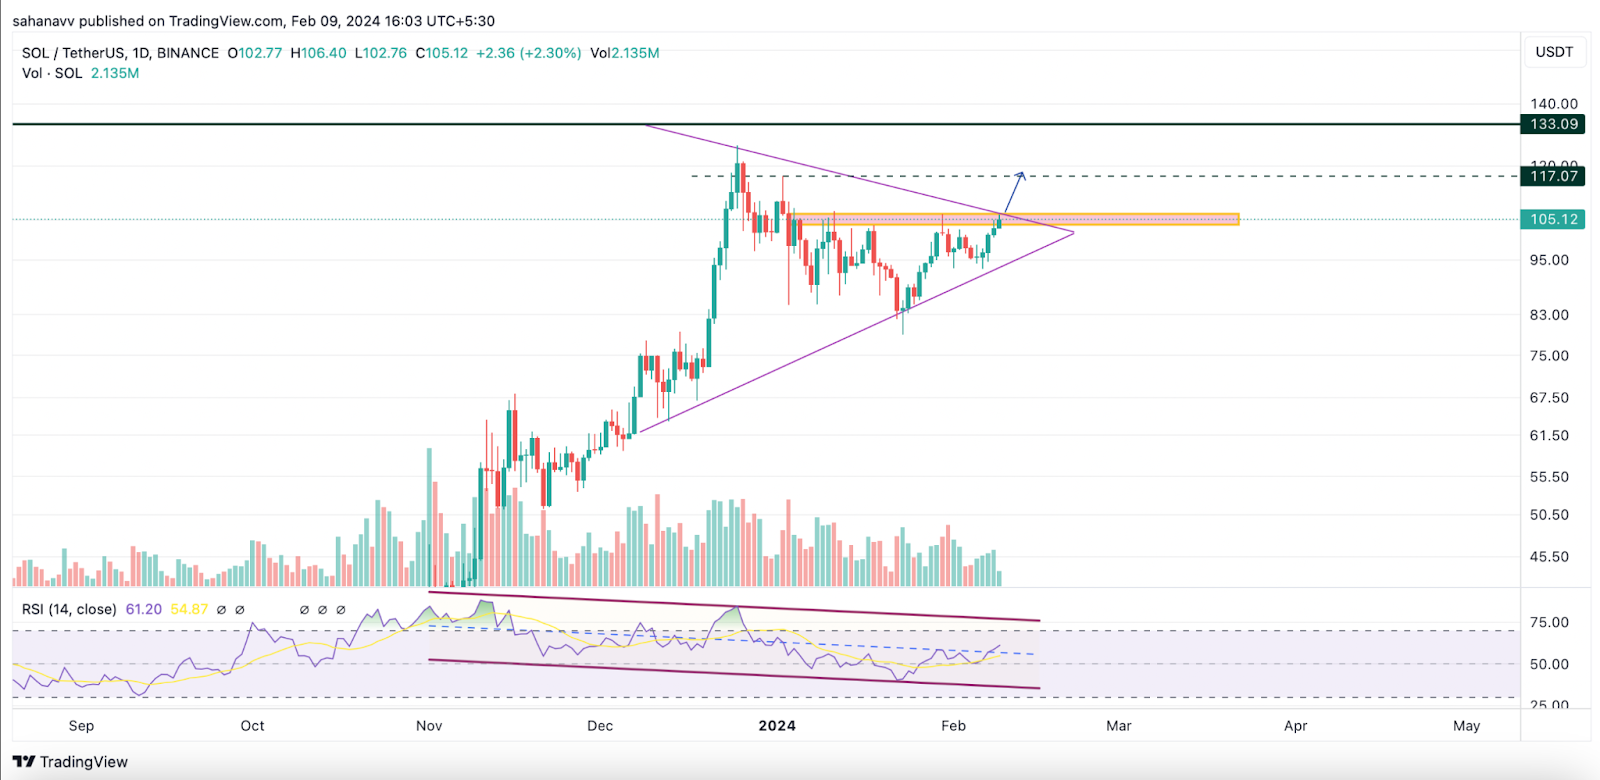 Chainlink Consolidates Where Solana Makes a Bullish Attempt: The Next Move May Shake Up the Altcoin Markets